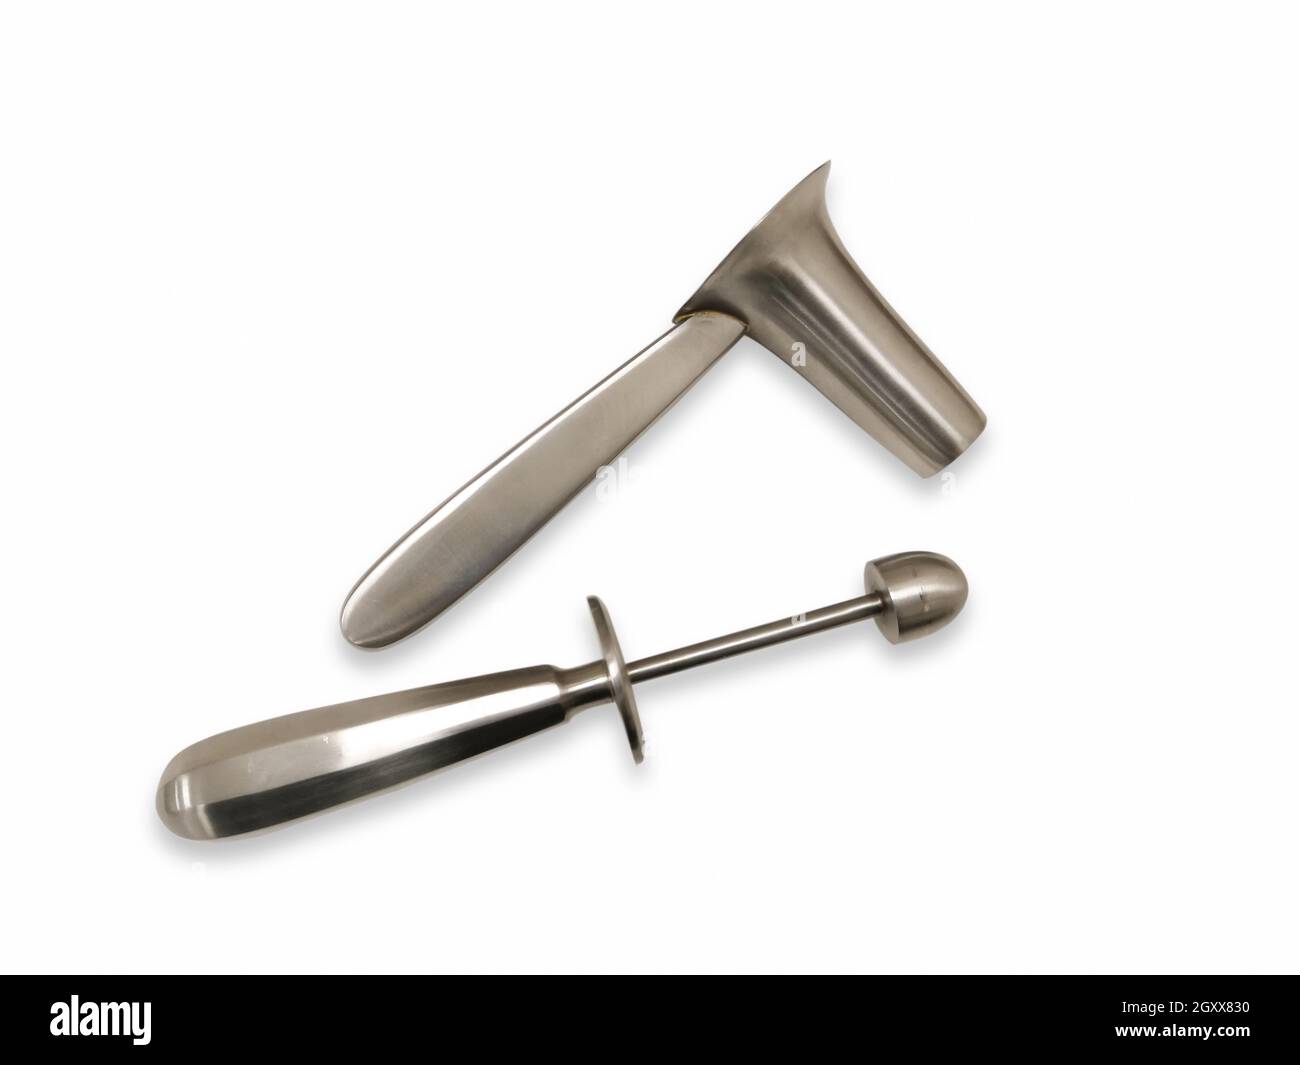 Closeup Image Of Surgical Instruments Proctoscope In White Background. Using for Examine The Insides Of The Rectum And The Anus. Selective Focus Stock Photo